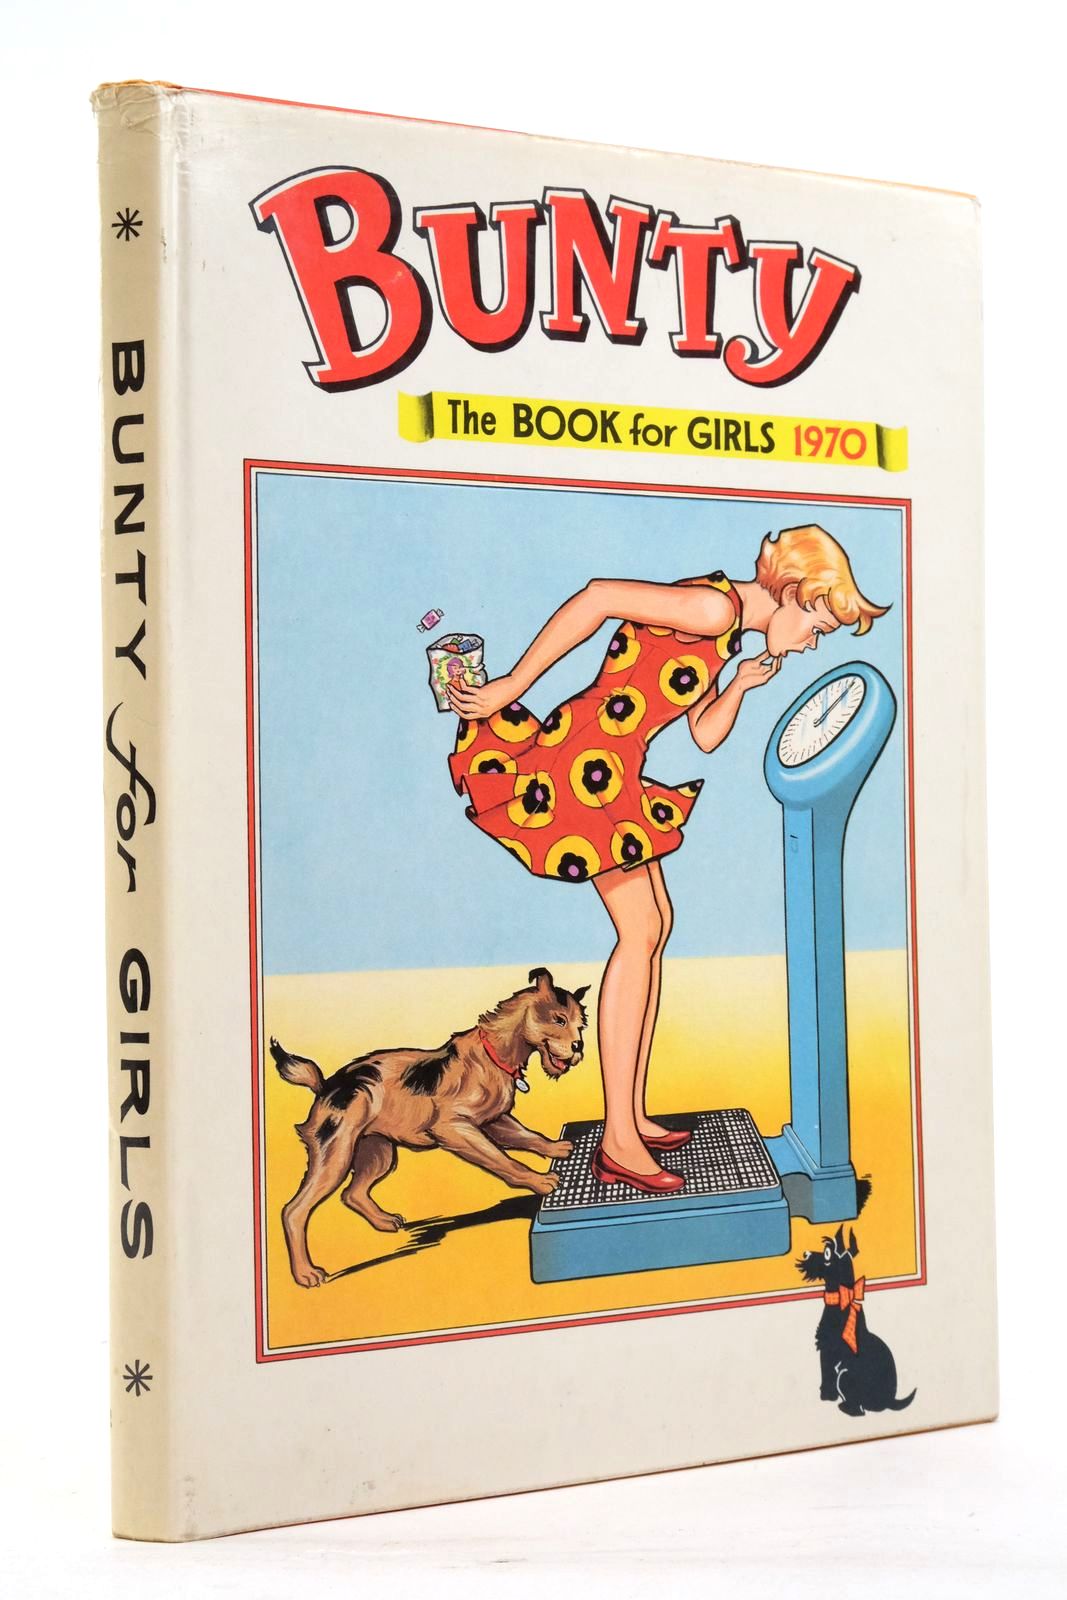 Photo of BUNTY FOR GIRLS 1970 published by D.C. Thomson &amp; Co Ltd. (STOCK CODE: 2138023)  for sale by Stella & Rose's Books